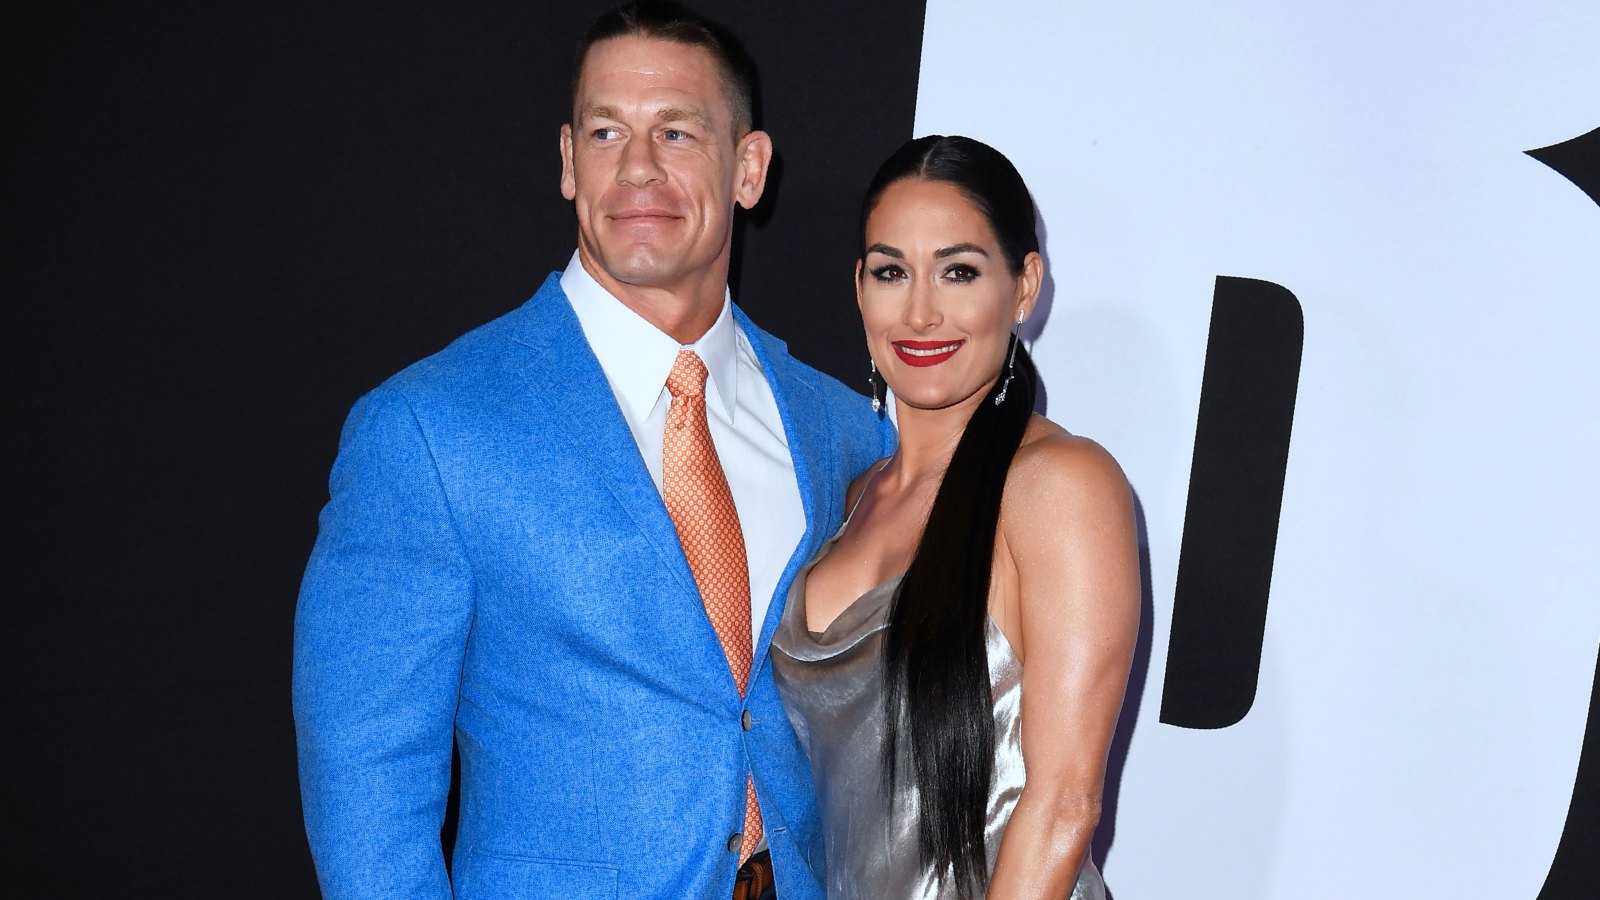 Nikki Bella Wants to ‘Live a Real Single Life’